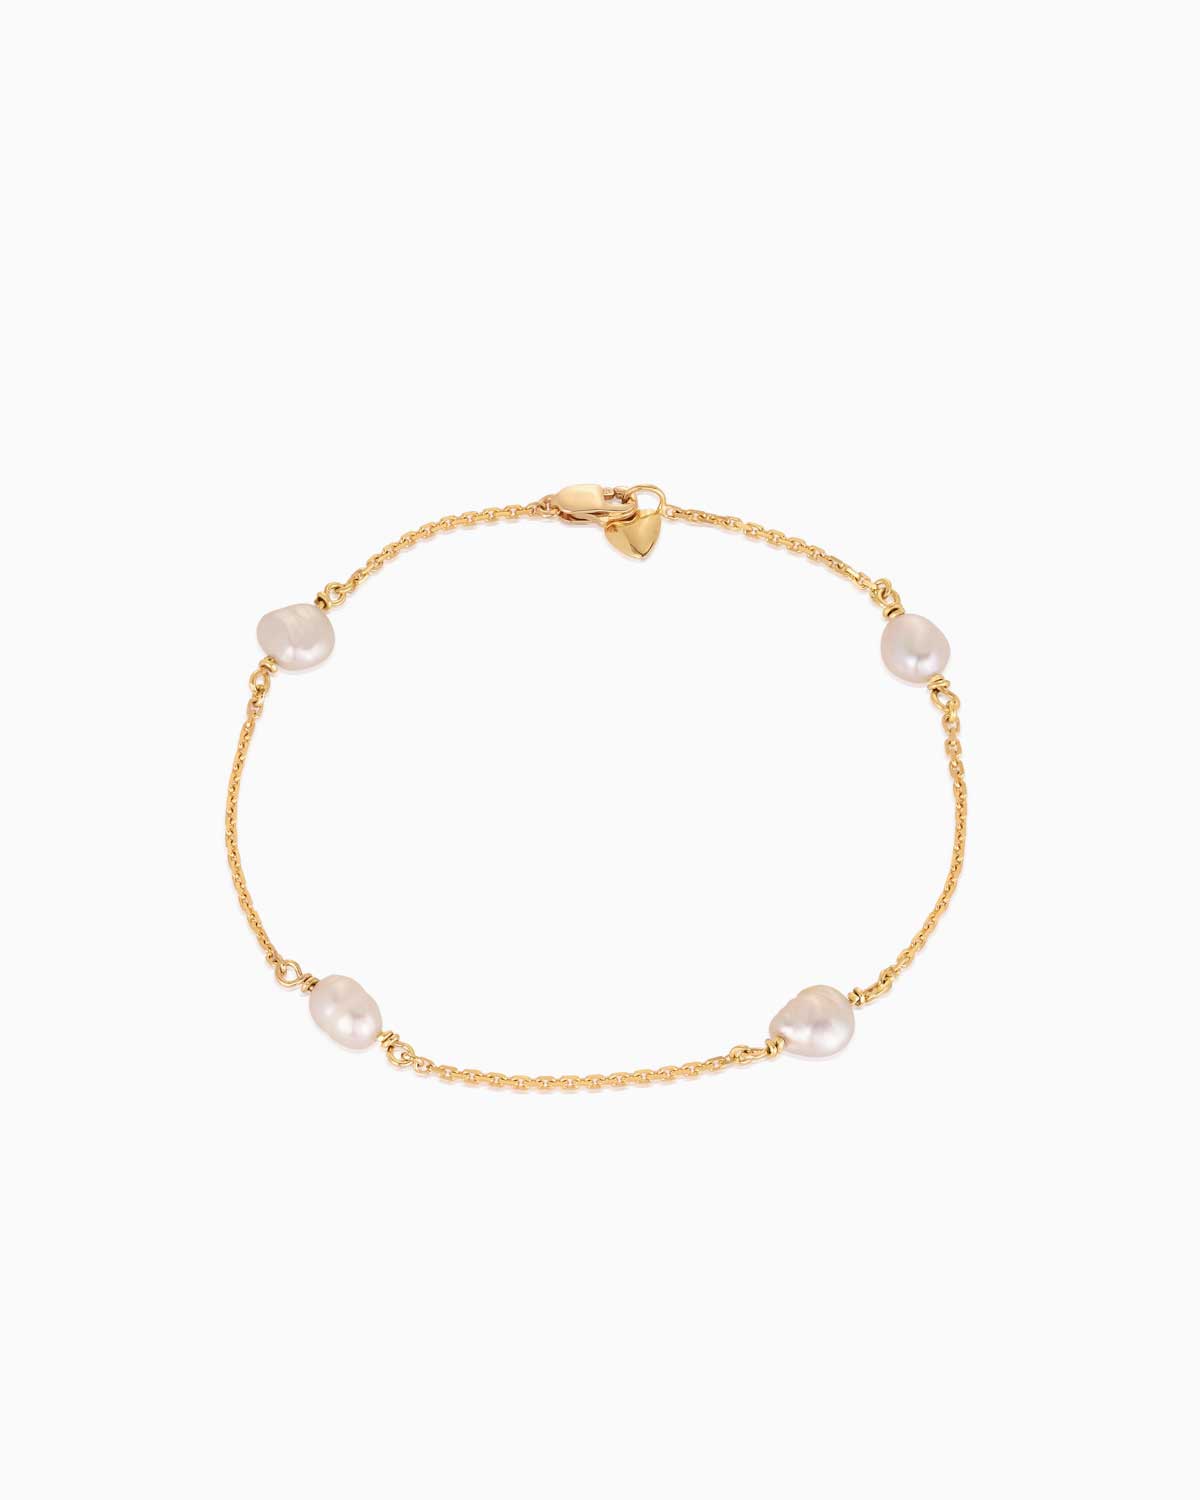 9 karat yellow gold pearls by the yard bracelet by claude and me jewellery. Featuring 4 akoya pearls